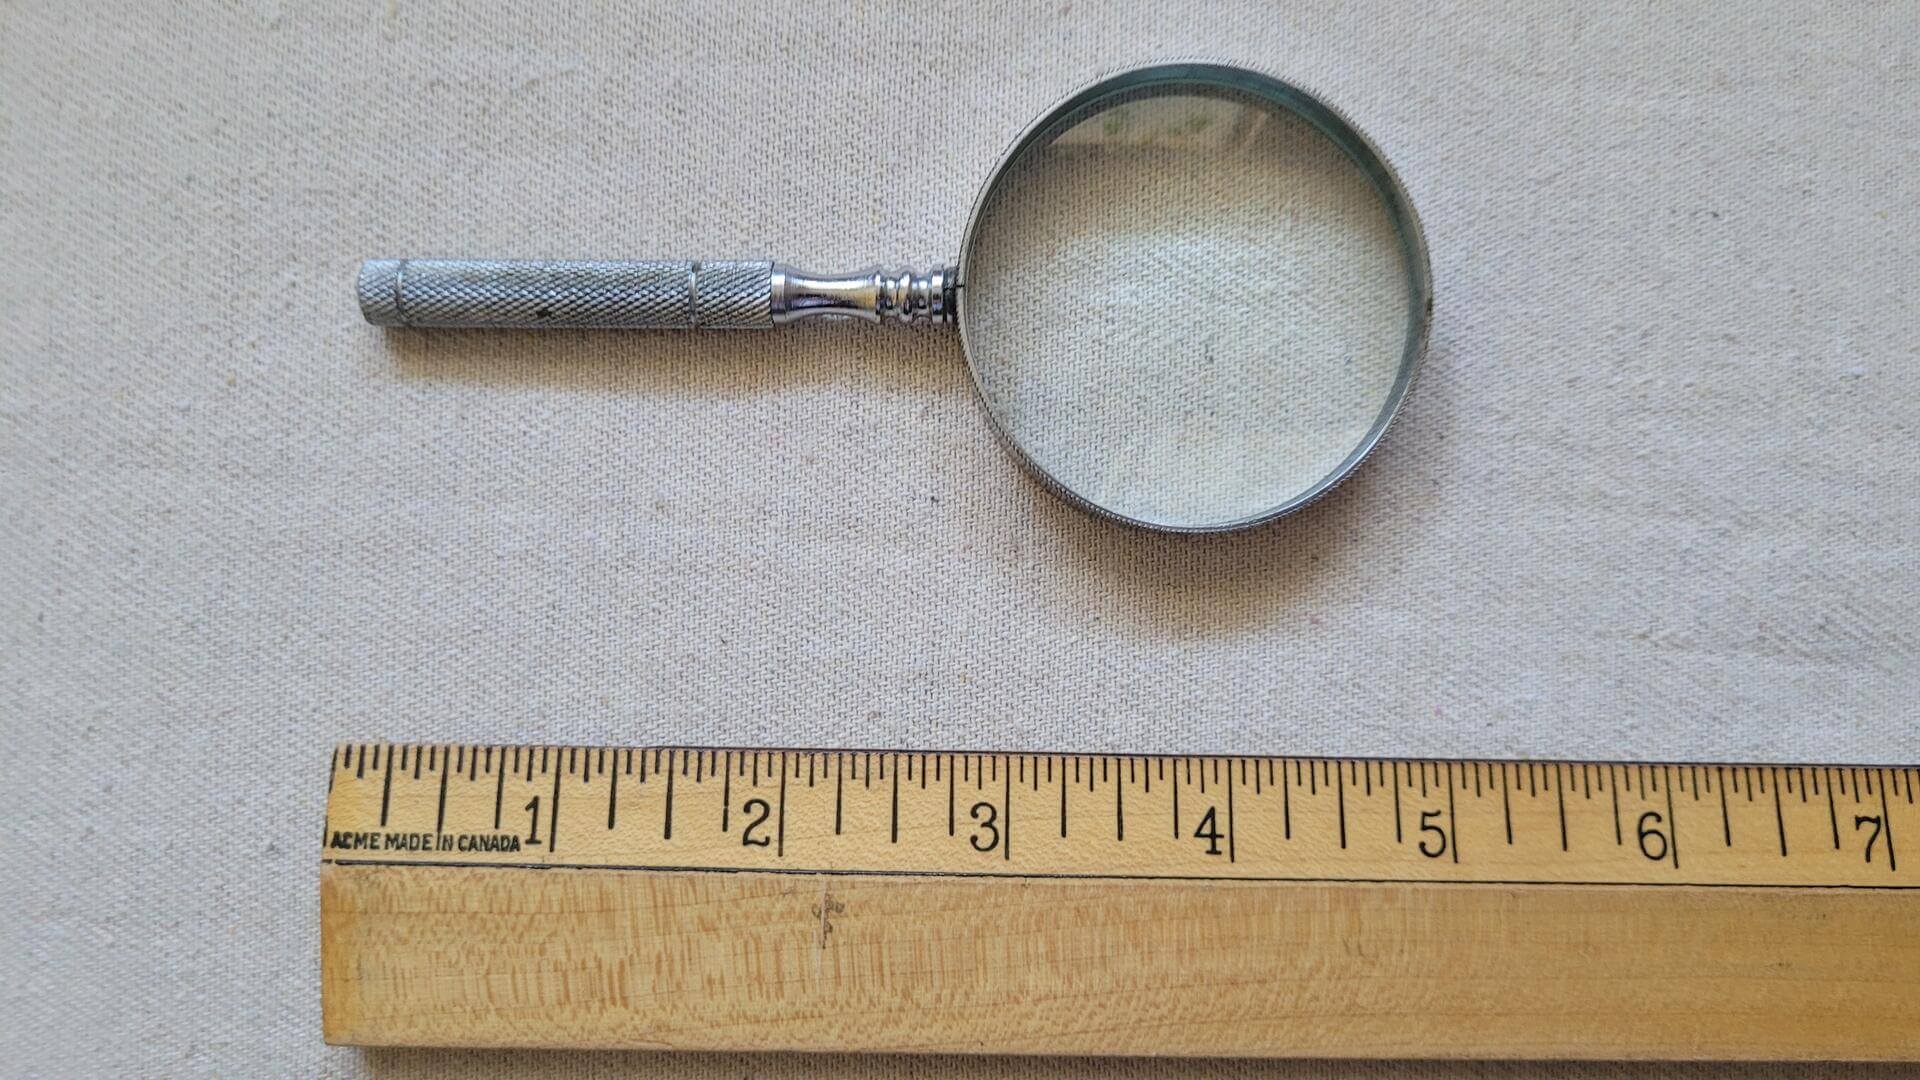 Vintage magnifying glass with knurled stainless steel handle 5 inches long with 2" lens. Antique collectible desktop office magnifier and visual aid tool